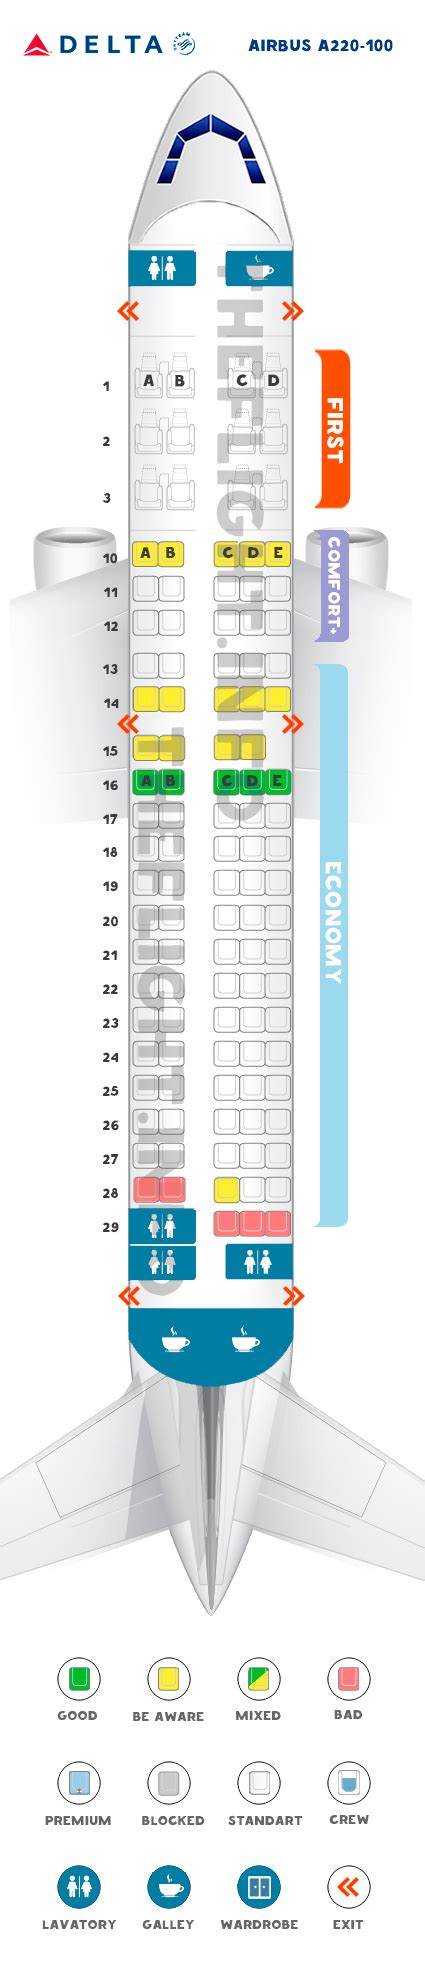 Seat Map Airbus A220 100 Delta Air Lines Best Seats In The Plane